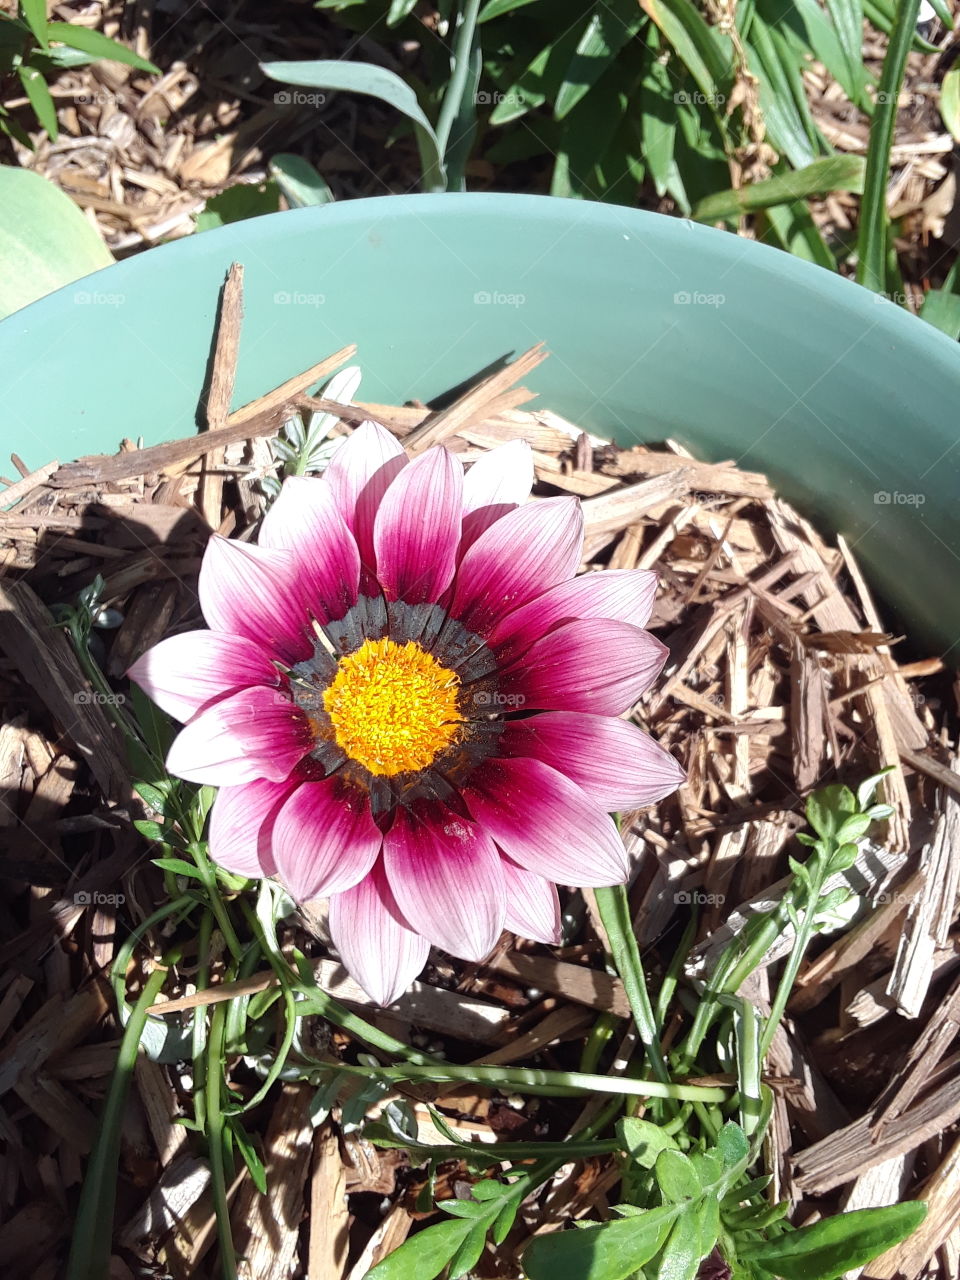 purple daisy with a yellow center in a pot